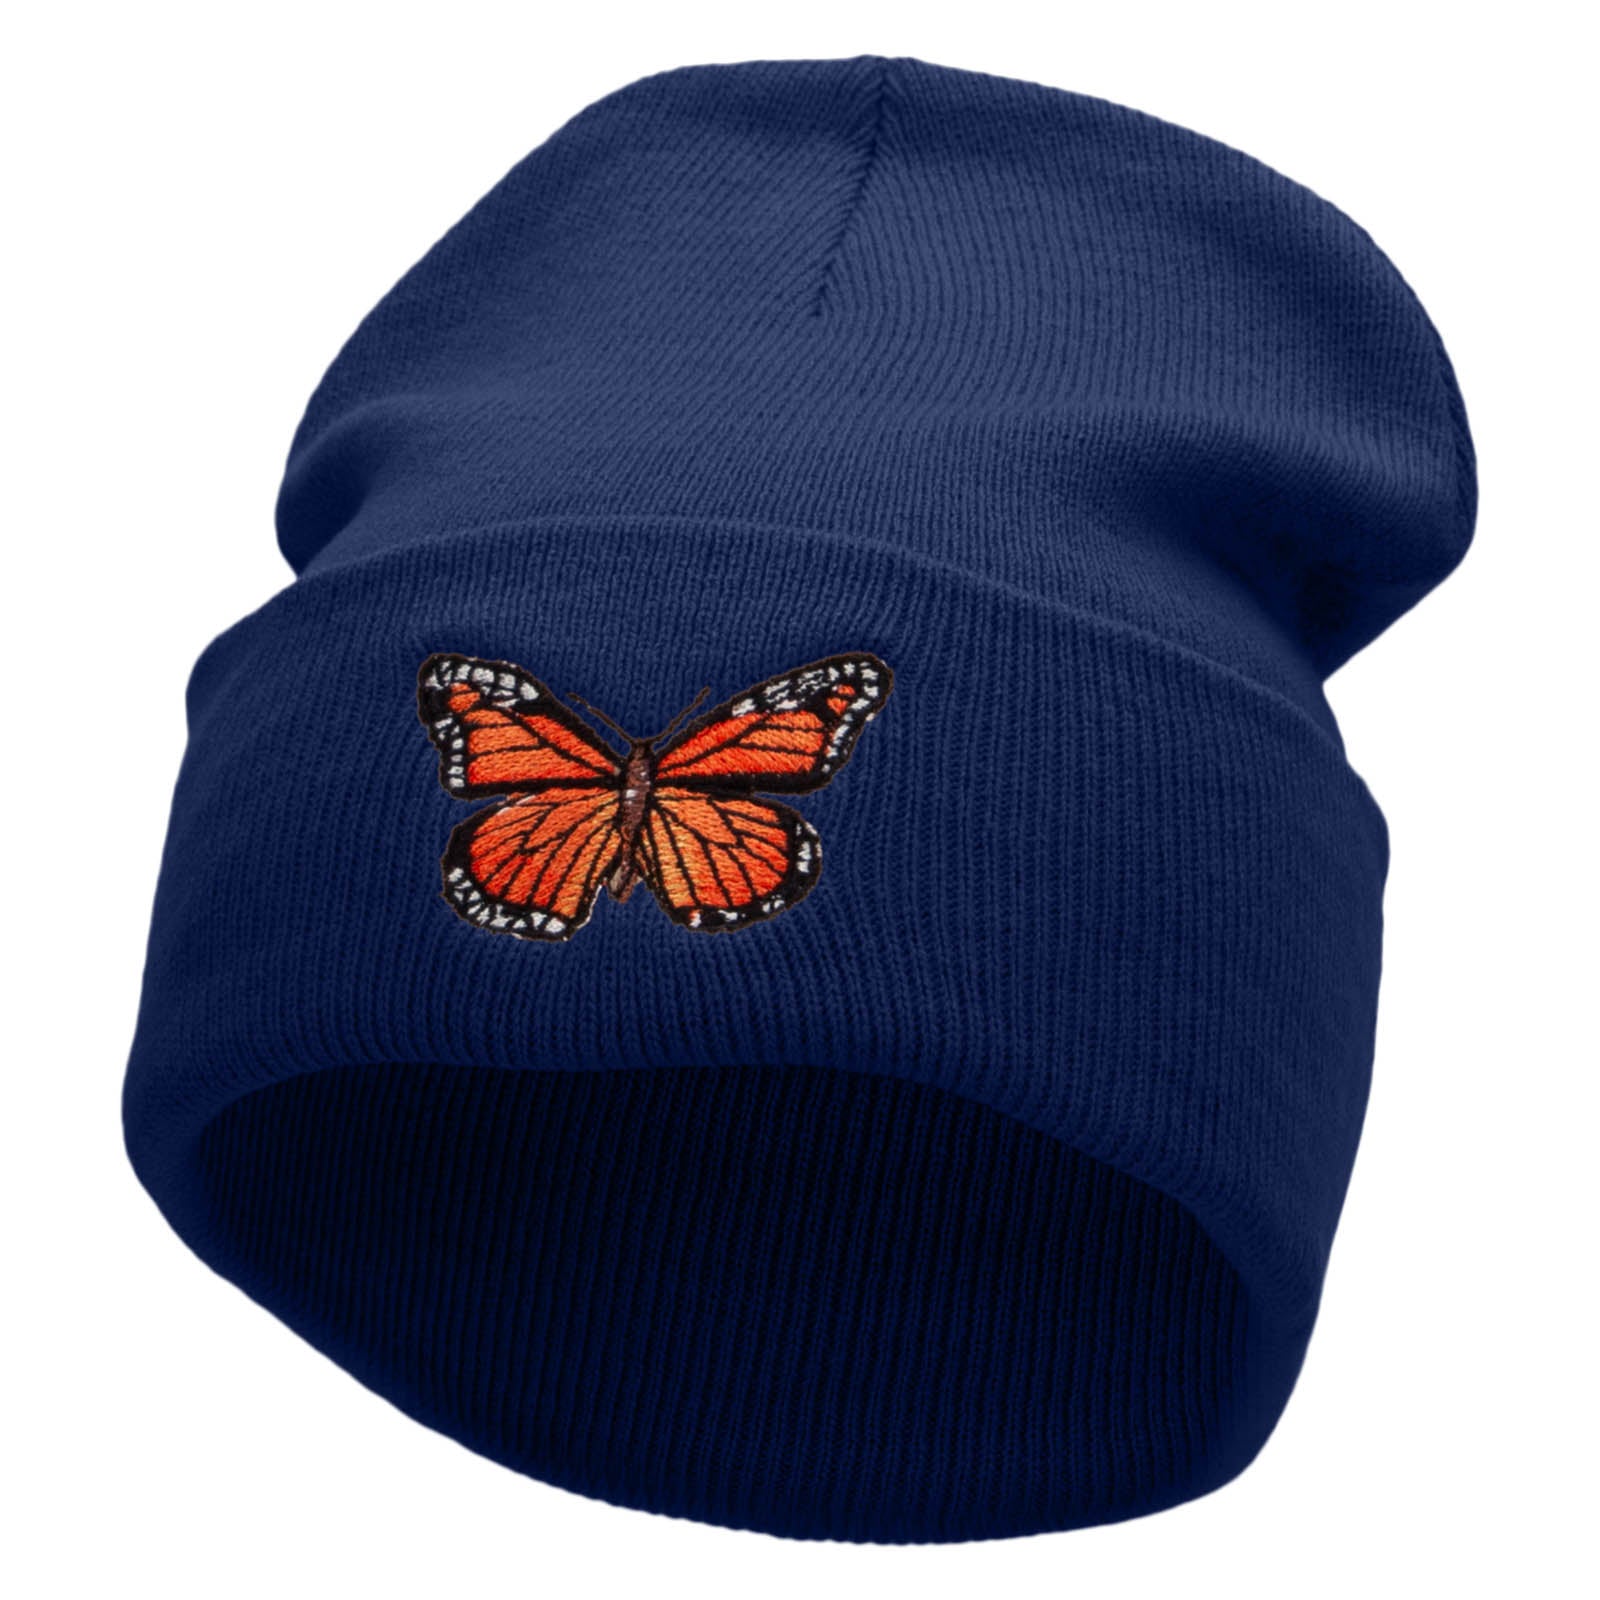 The Monarch Butterfly Embroidered 12 inch Acrylic Cuffed Long Beanie - Navy OSFM